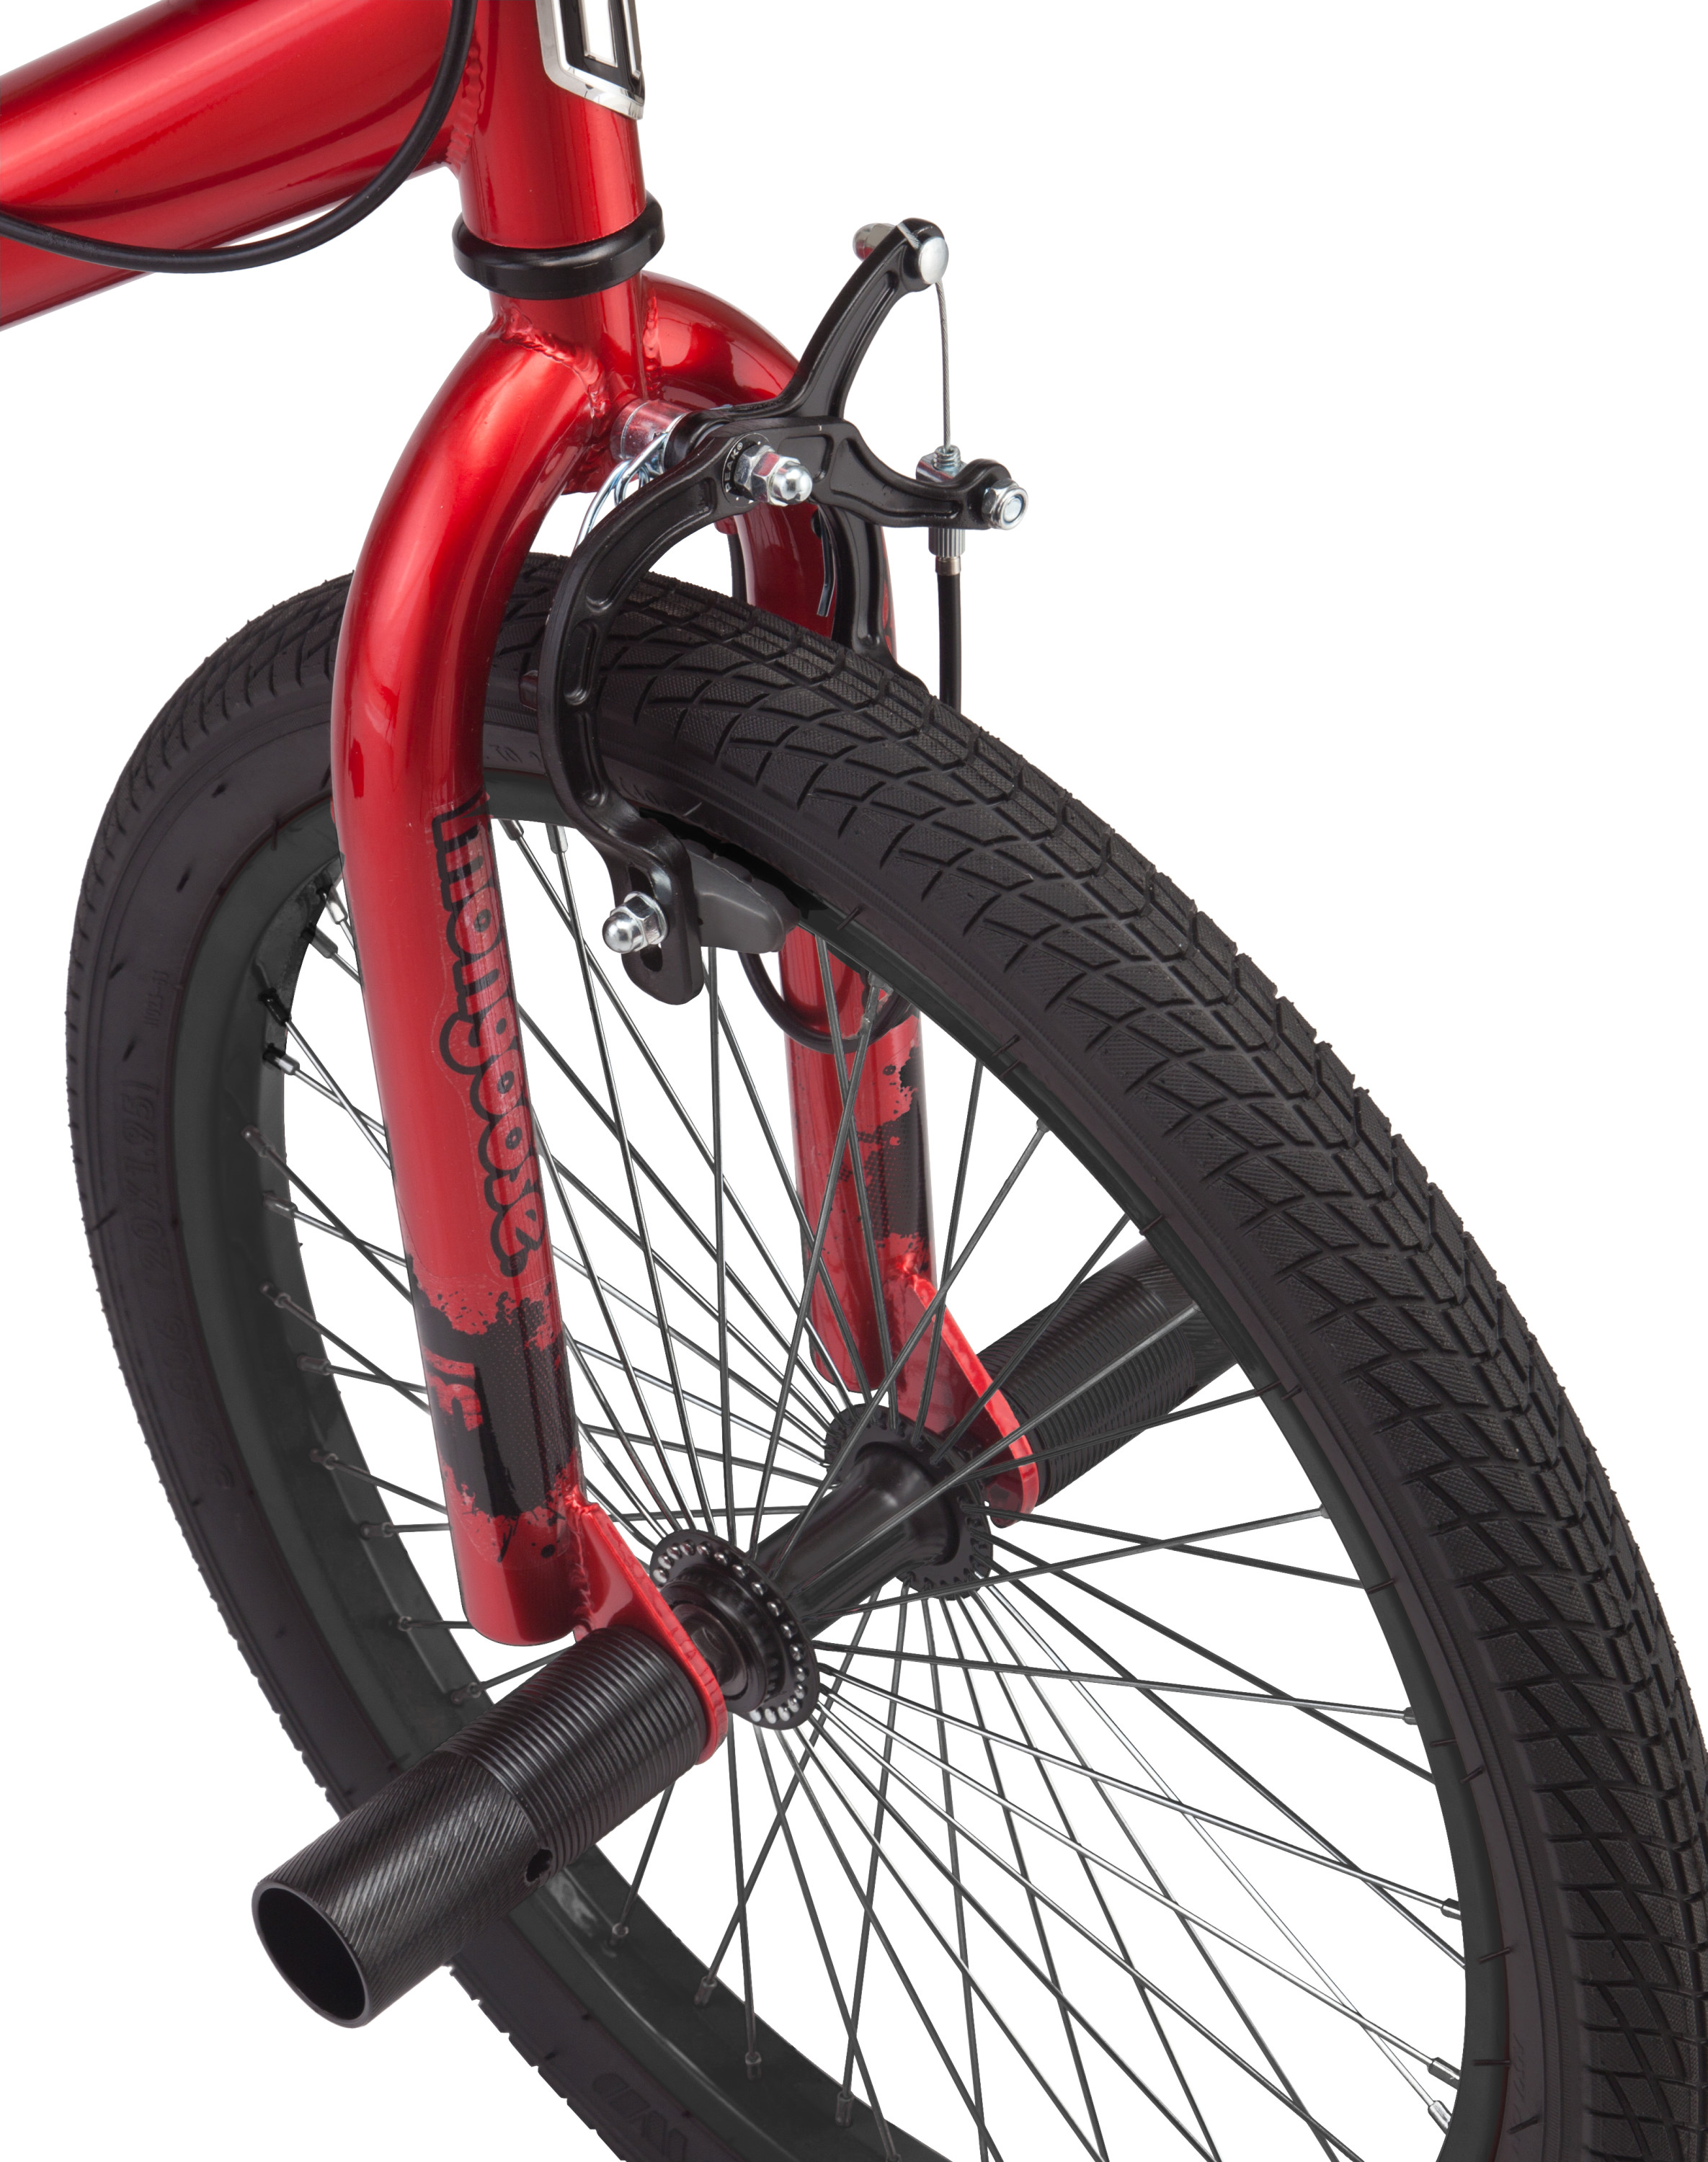 Mongoose 20" Outerlimit BMX Bike, Red - image 6 of 8